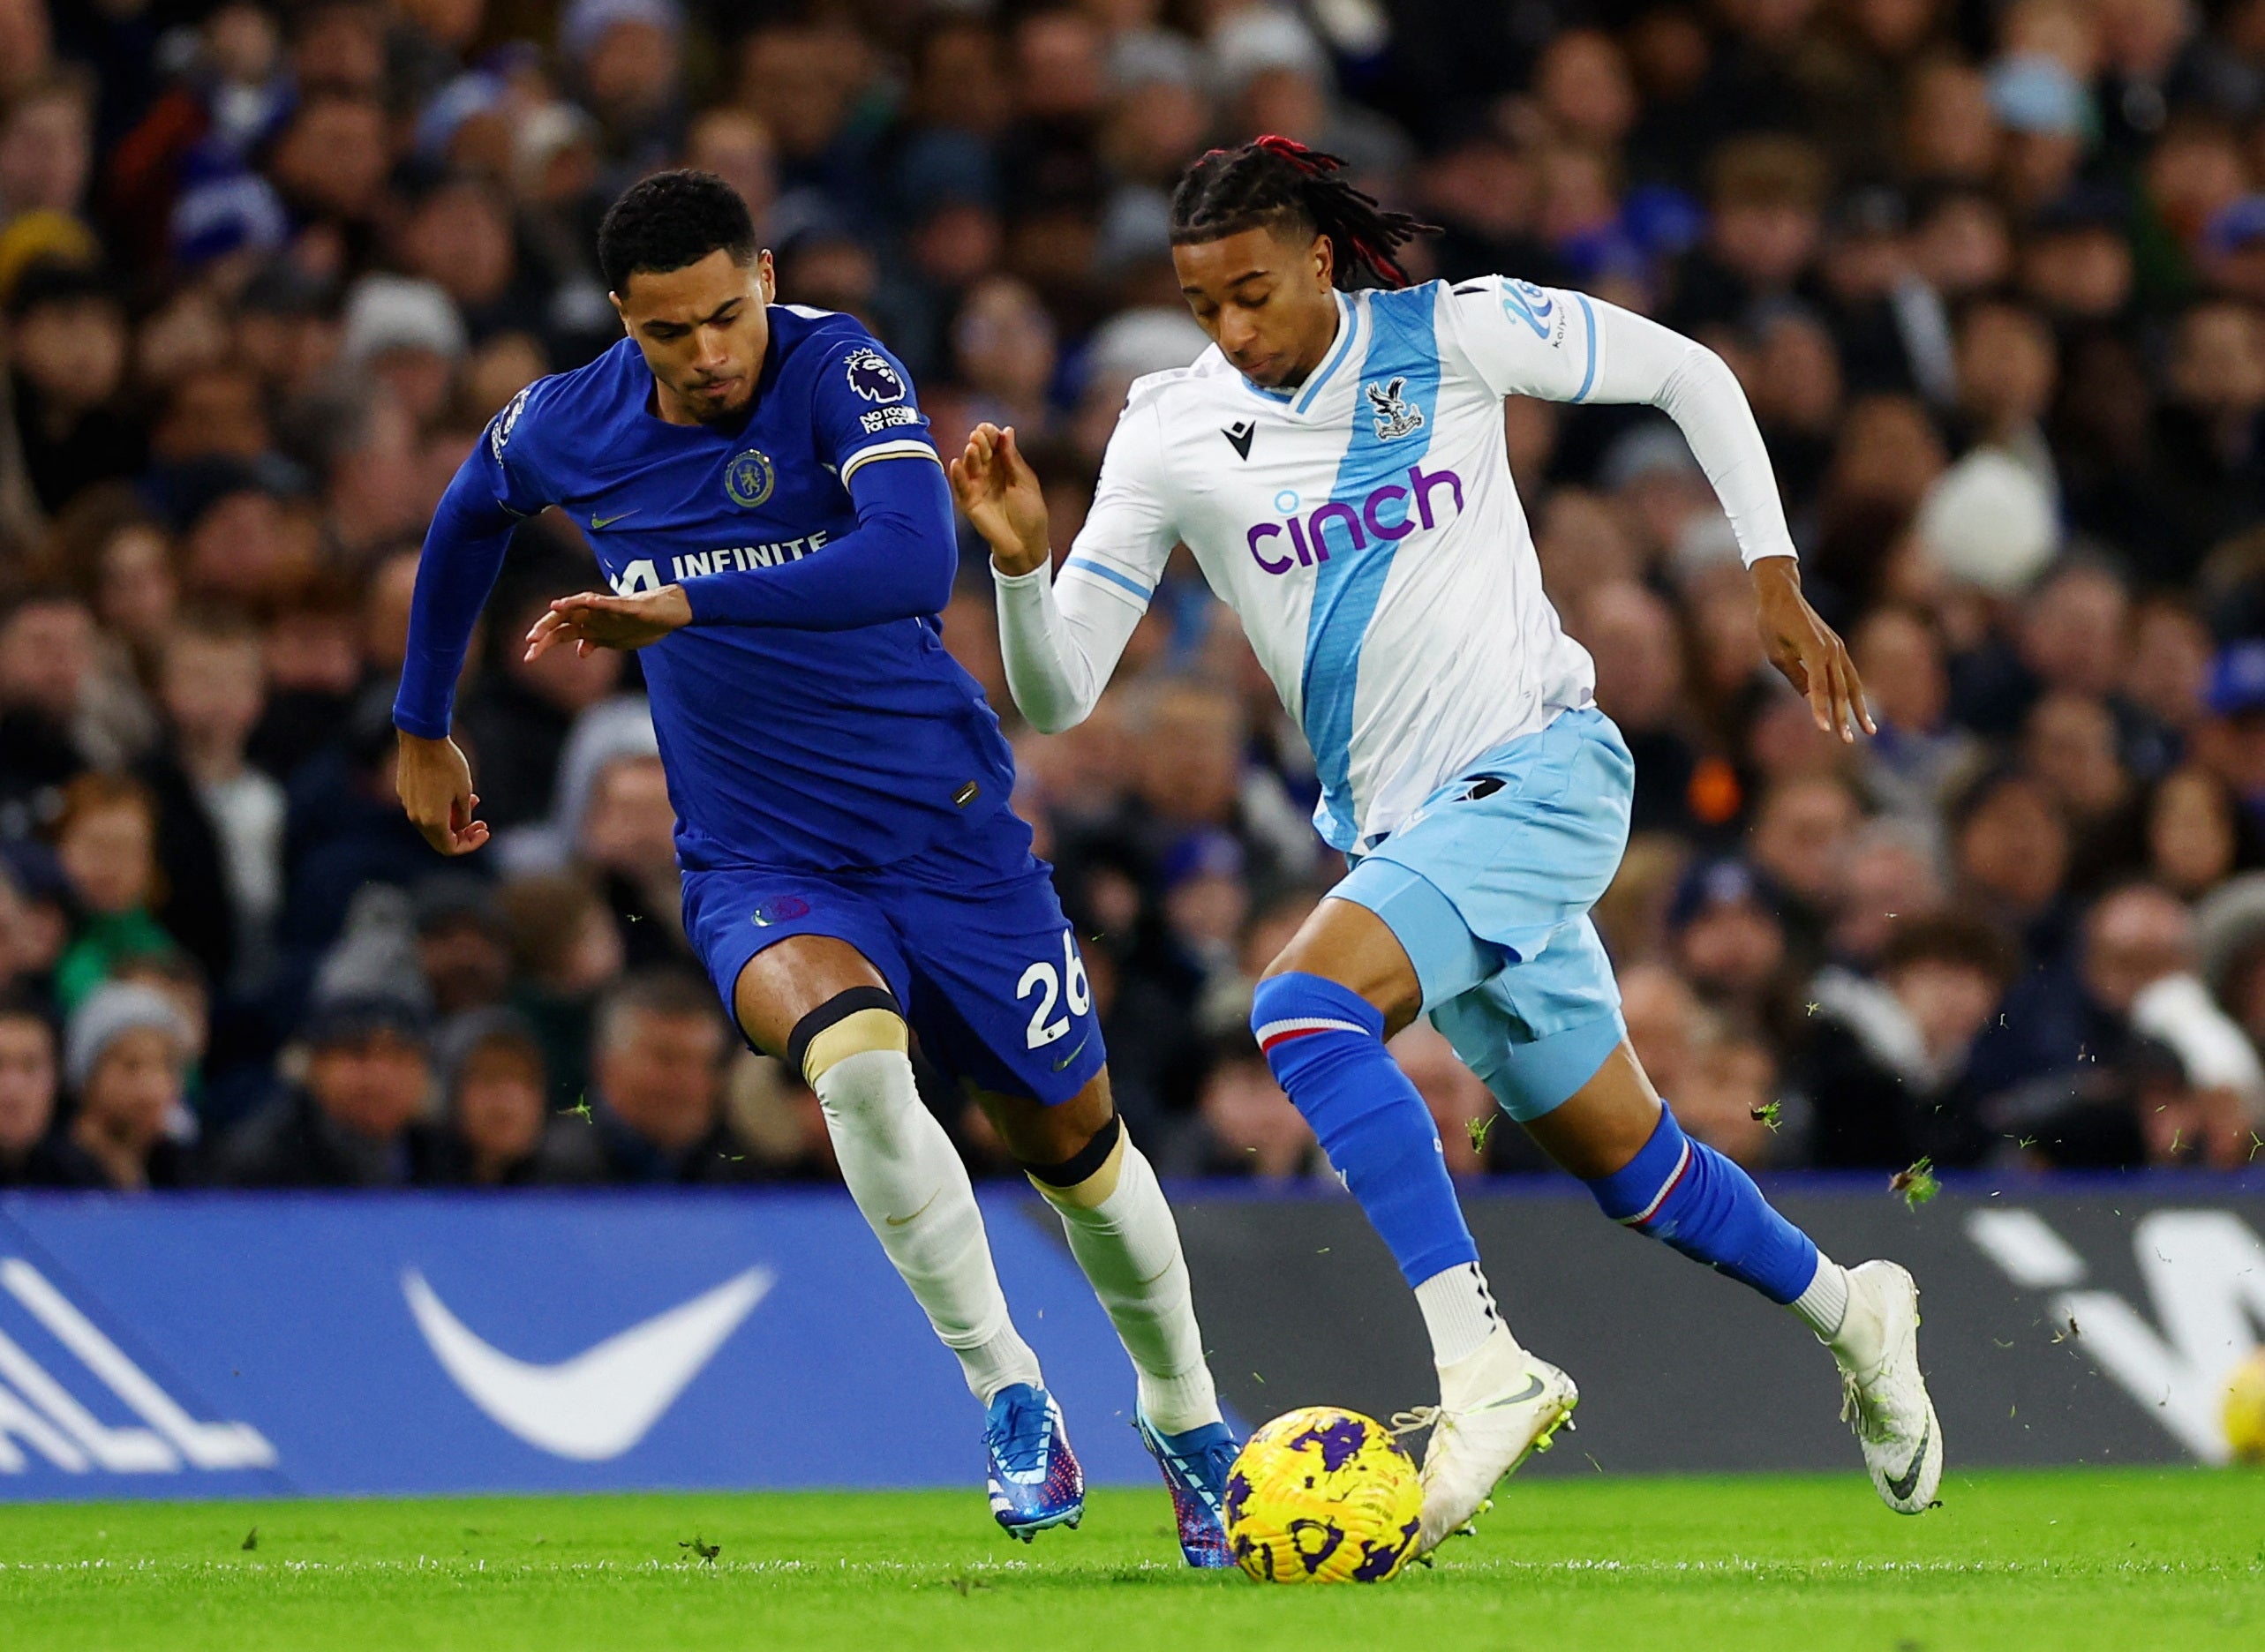 crystal palace vs chelsea: prediction, kick-off time, tv, live stream, team news, h2h results, odds